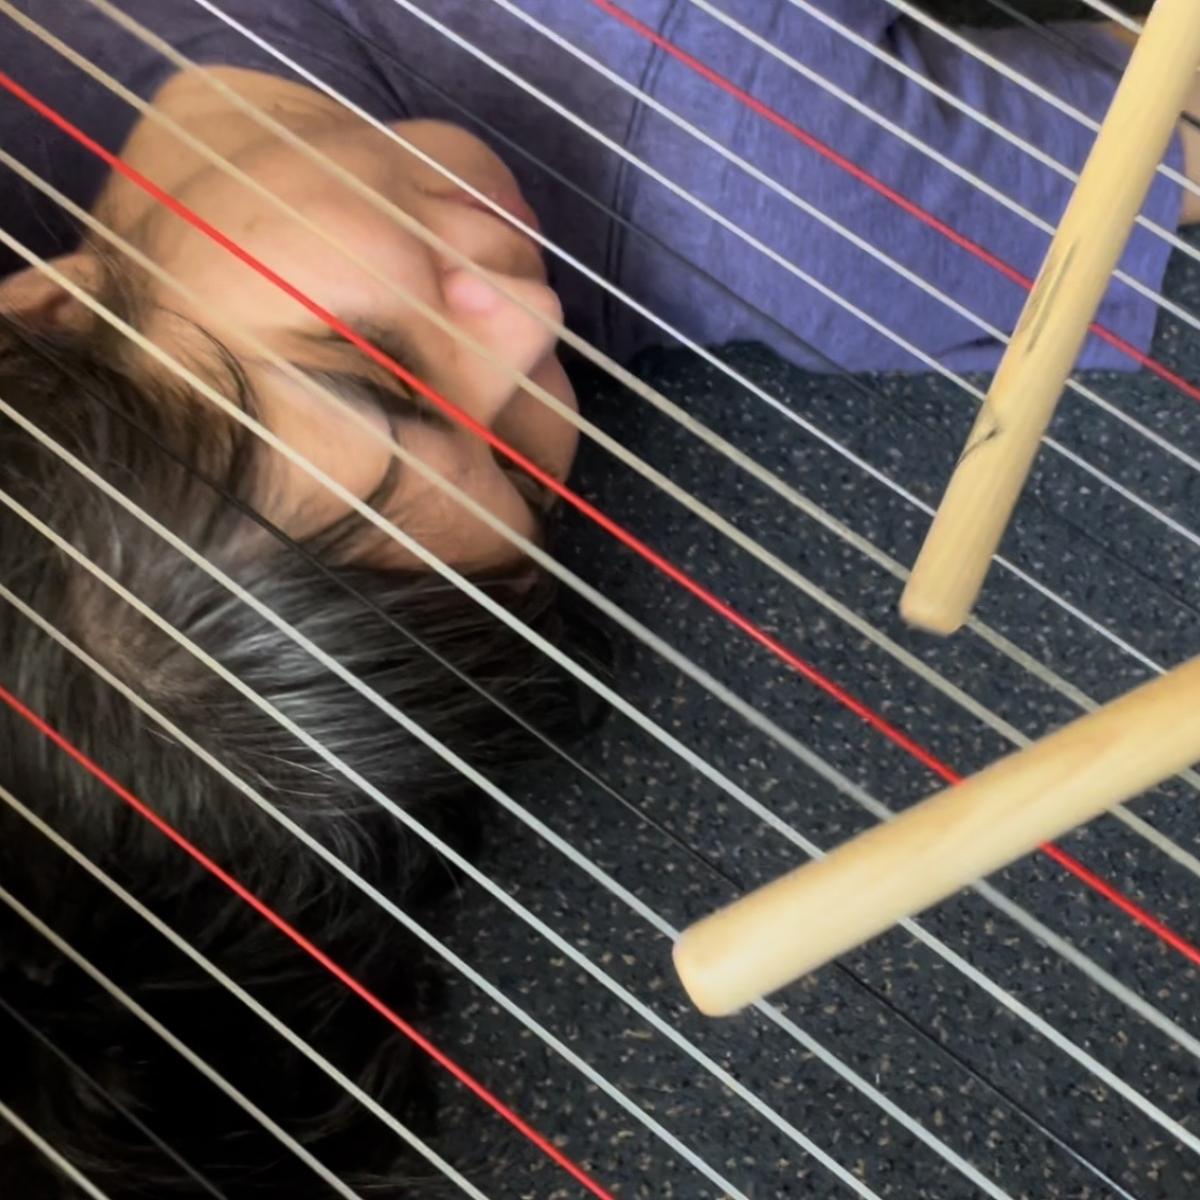 A woman lays under the strings of a harp, with drum sticks laying on top.